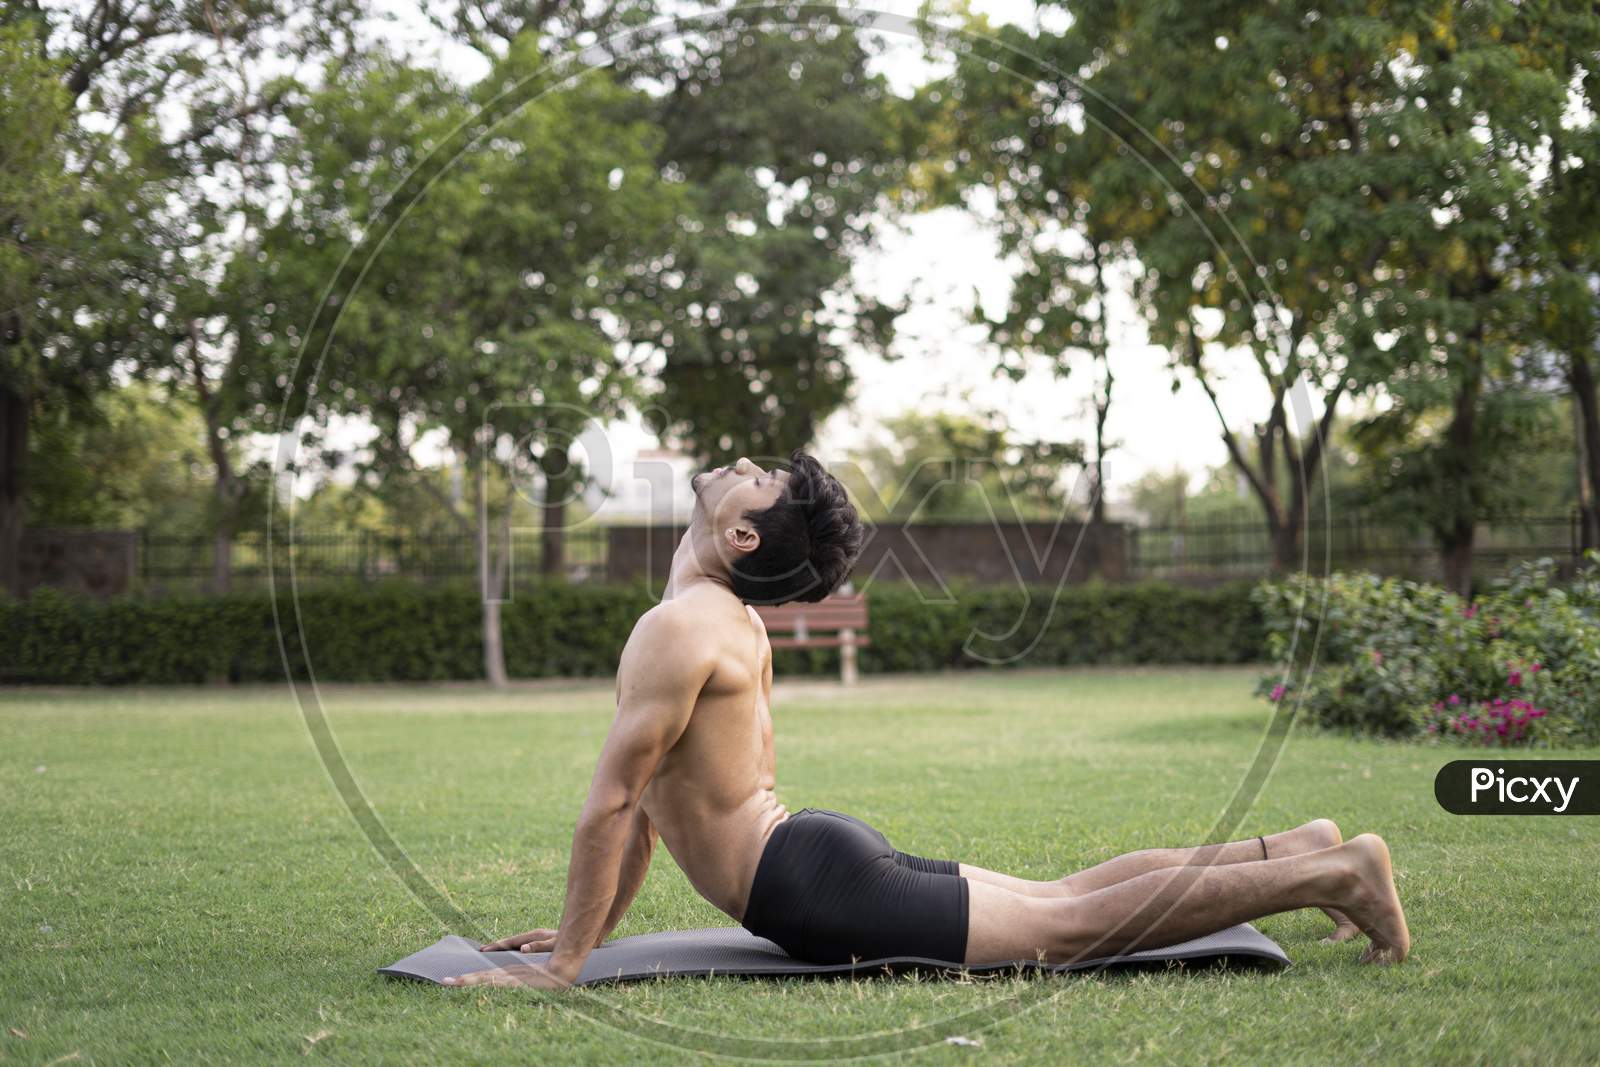 A Young Indian Shredded Teenage Boy Doing Yoga Aasan In The Park On International Yoga Day